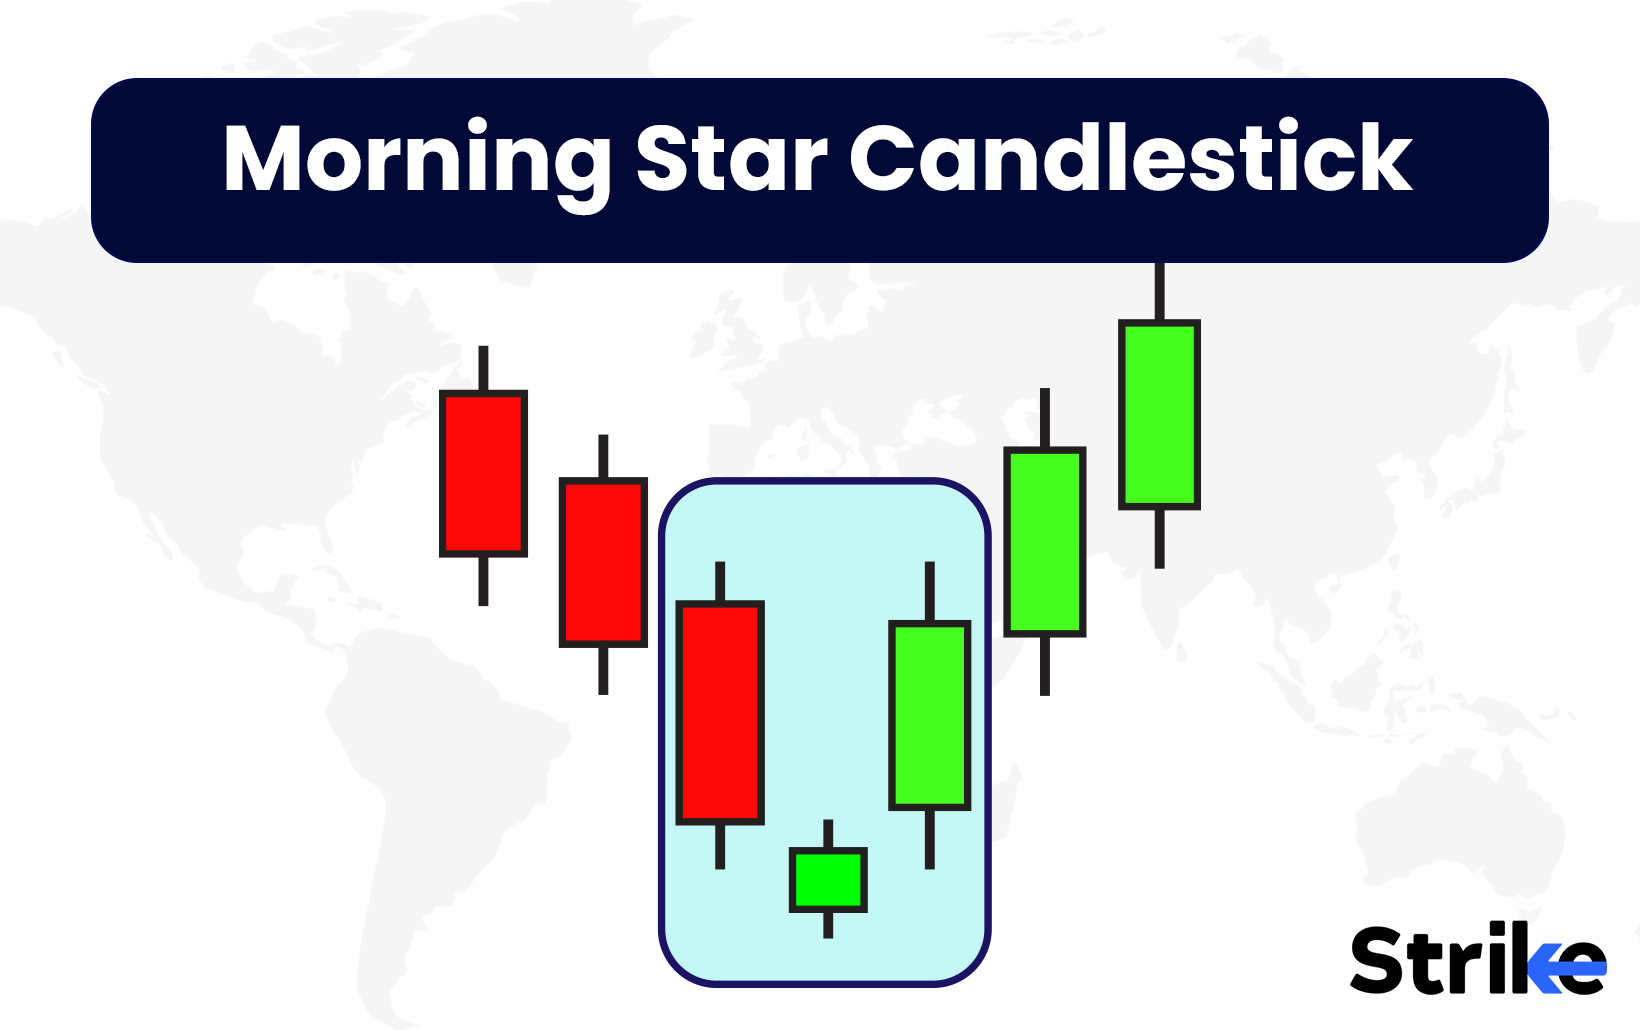 Morning Star Candlestick: Definition, Structure, Trading, Benefits, and Limitations